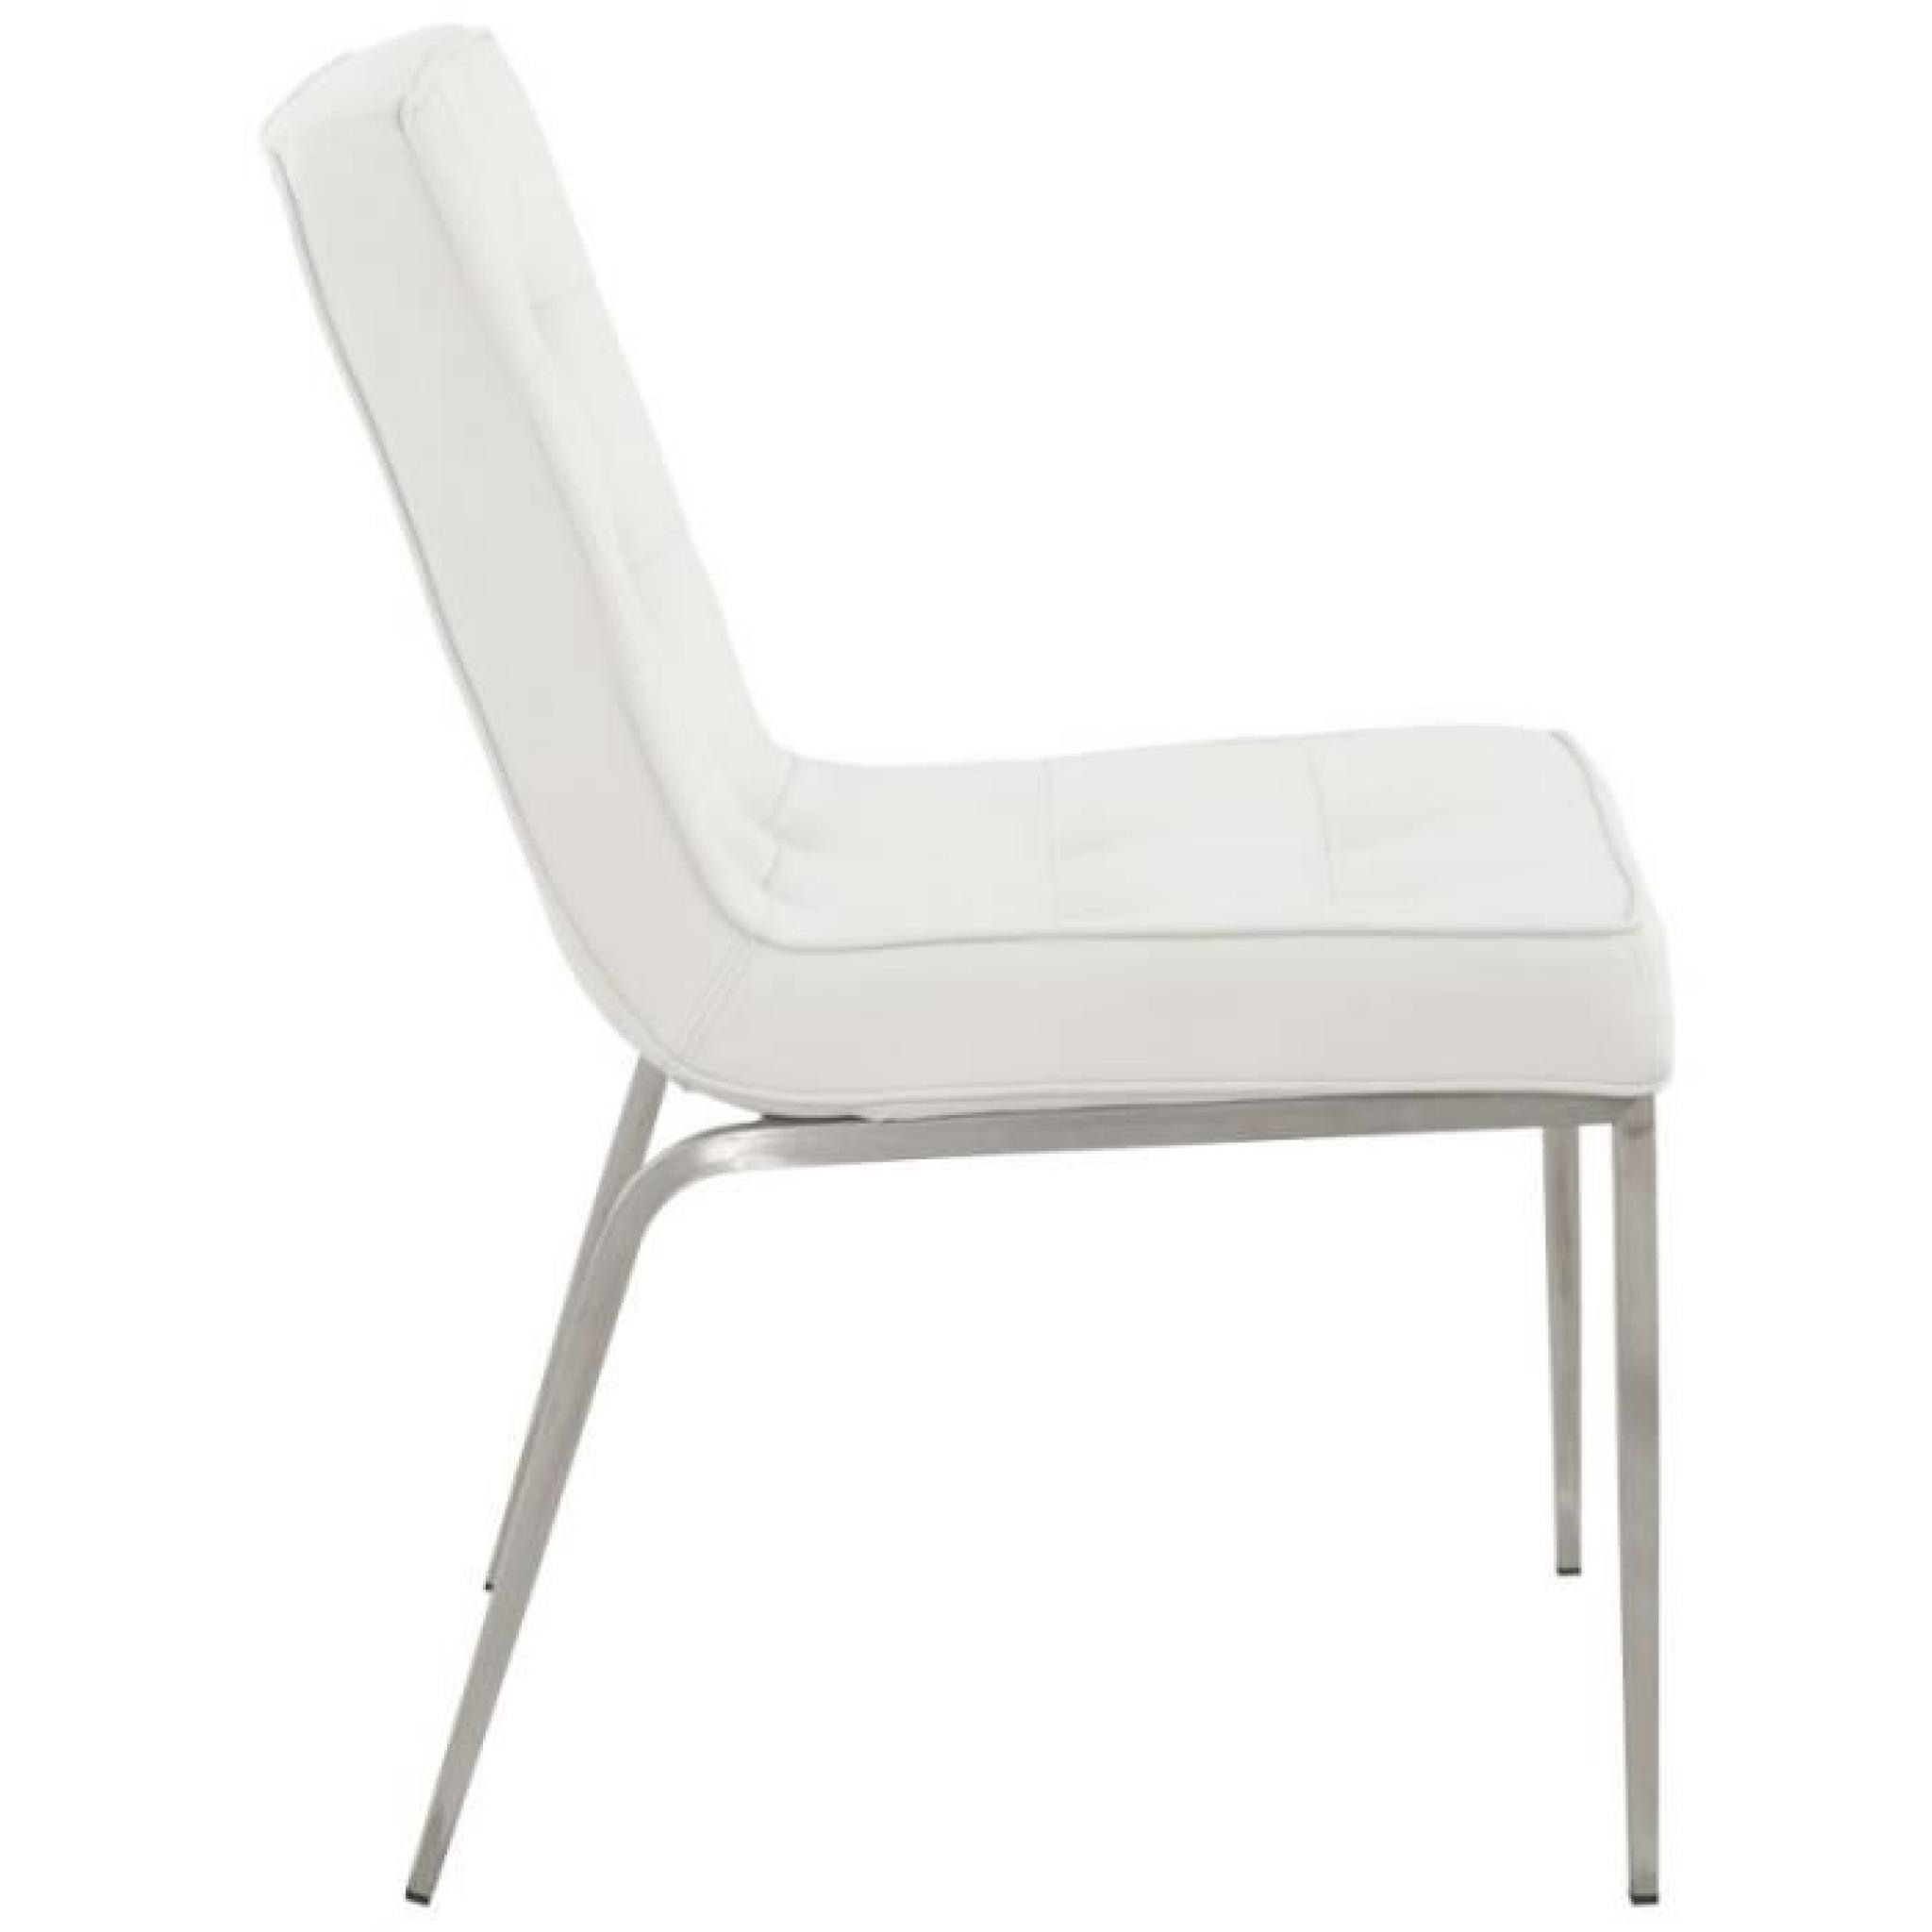 CHAISE MADRID DESIGN BLANCHE pas cher